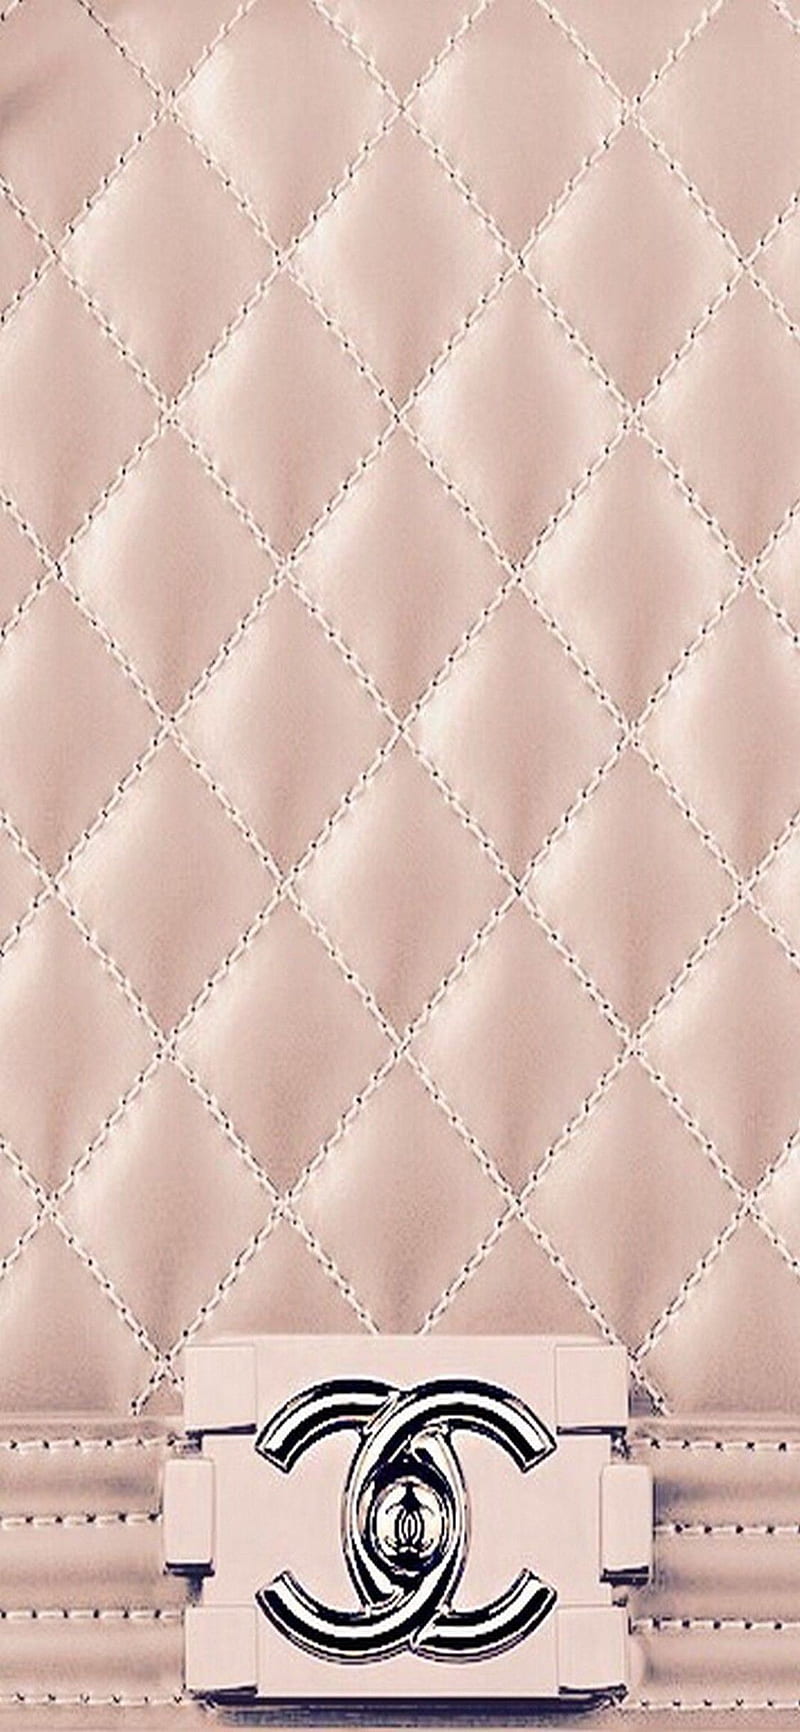 Rose Gold Queen iPhone Wallpaper by EvaLand